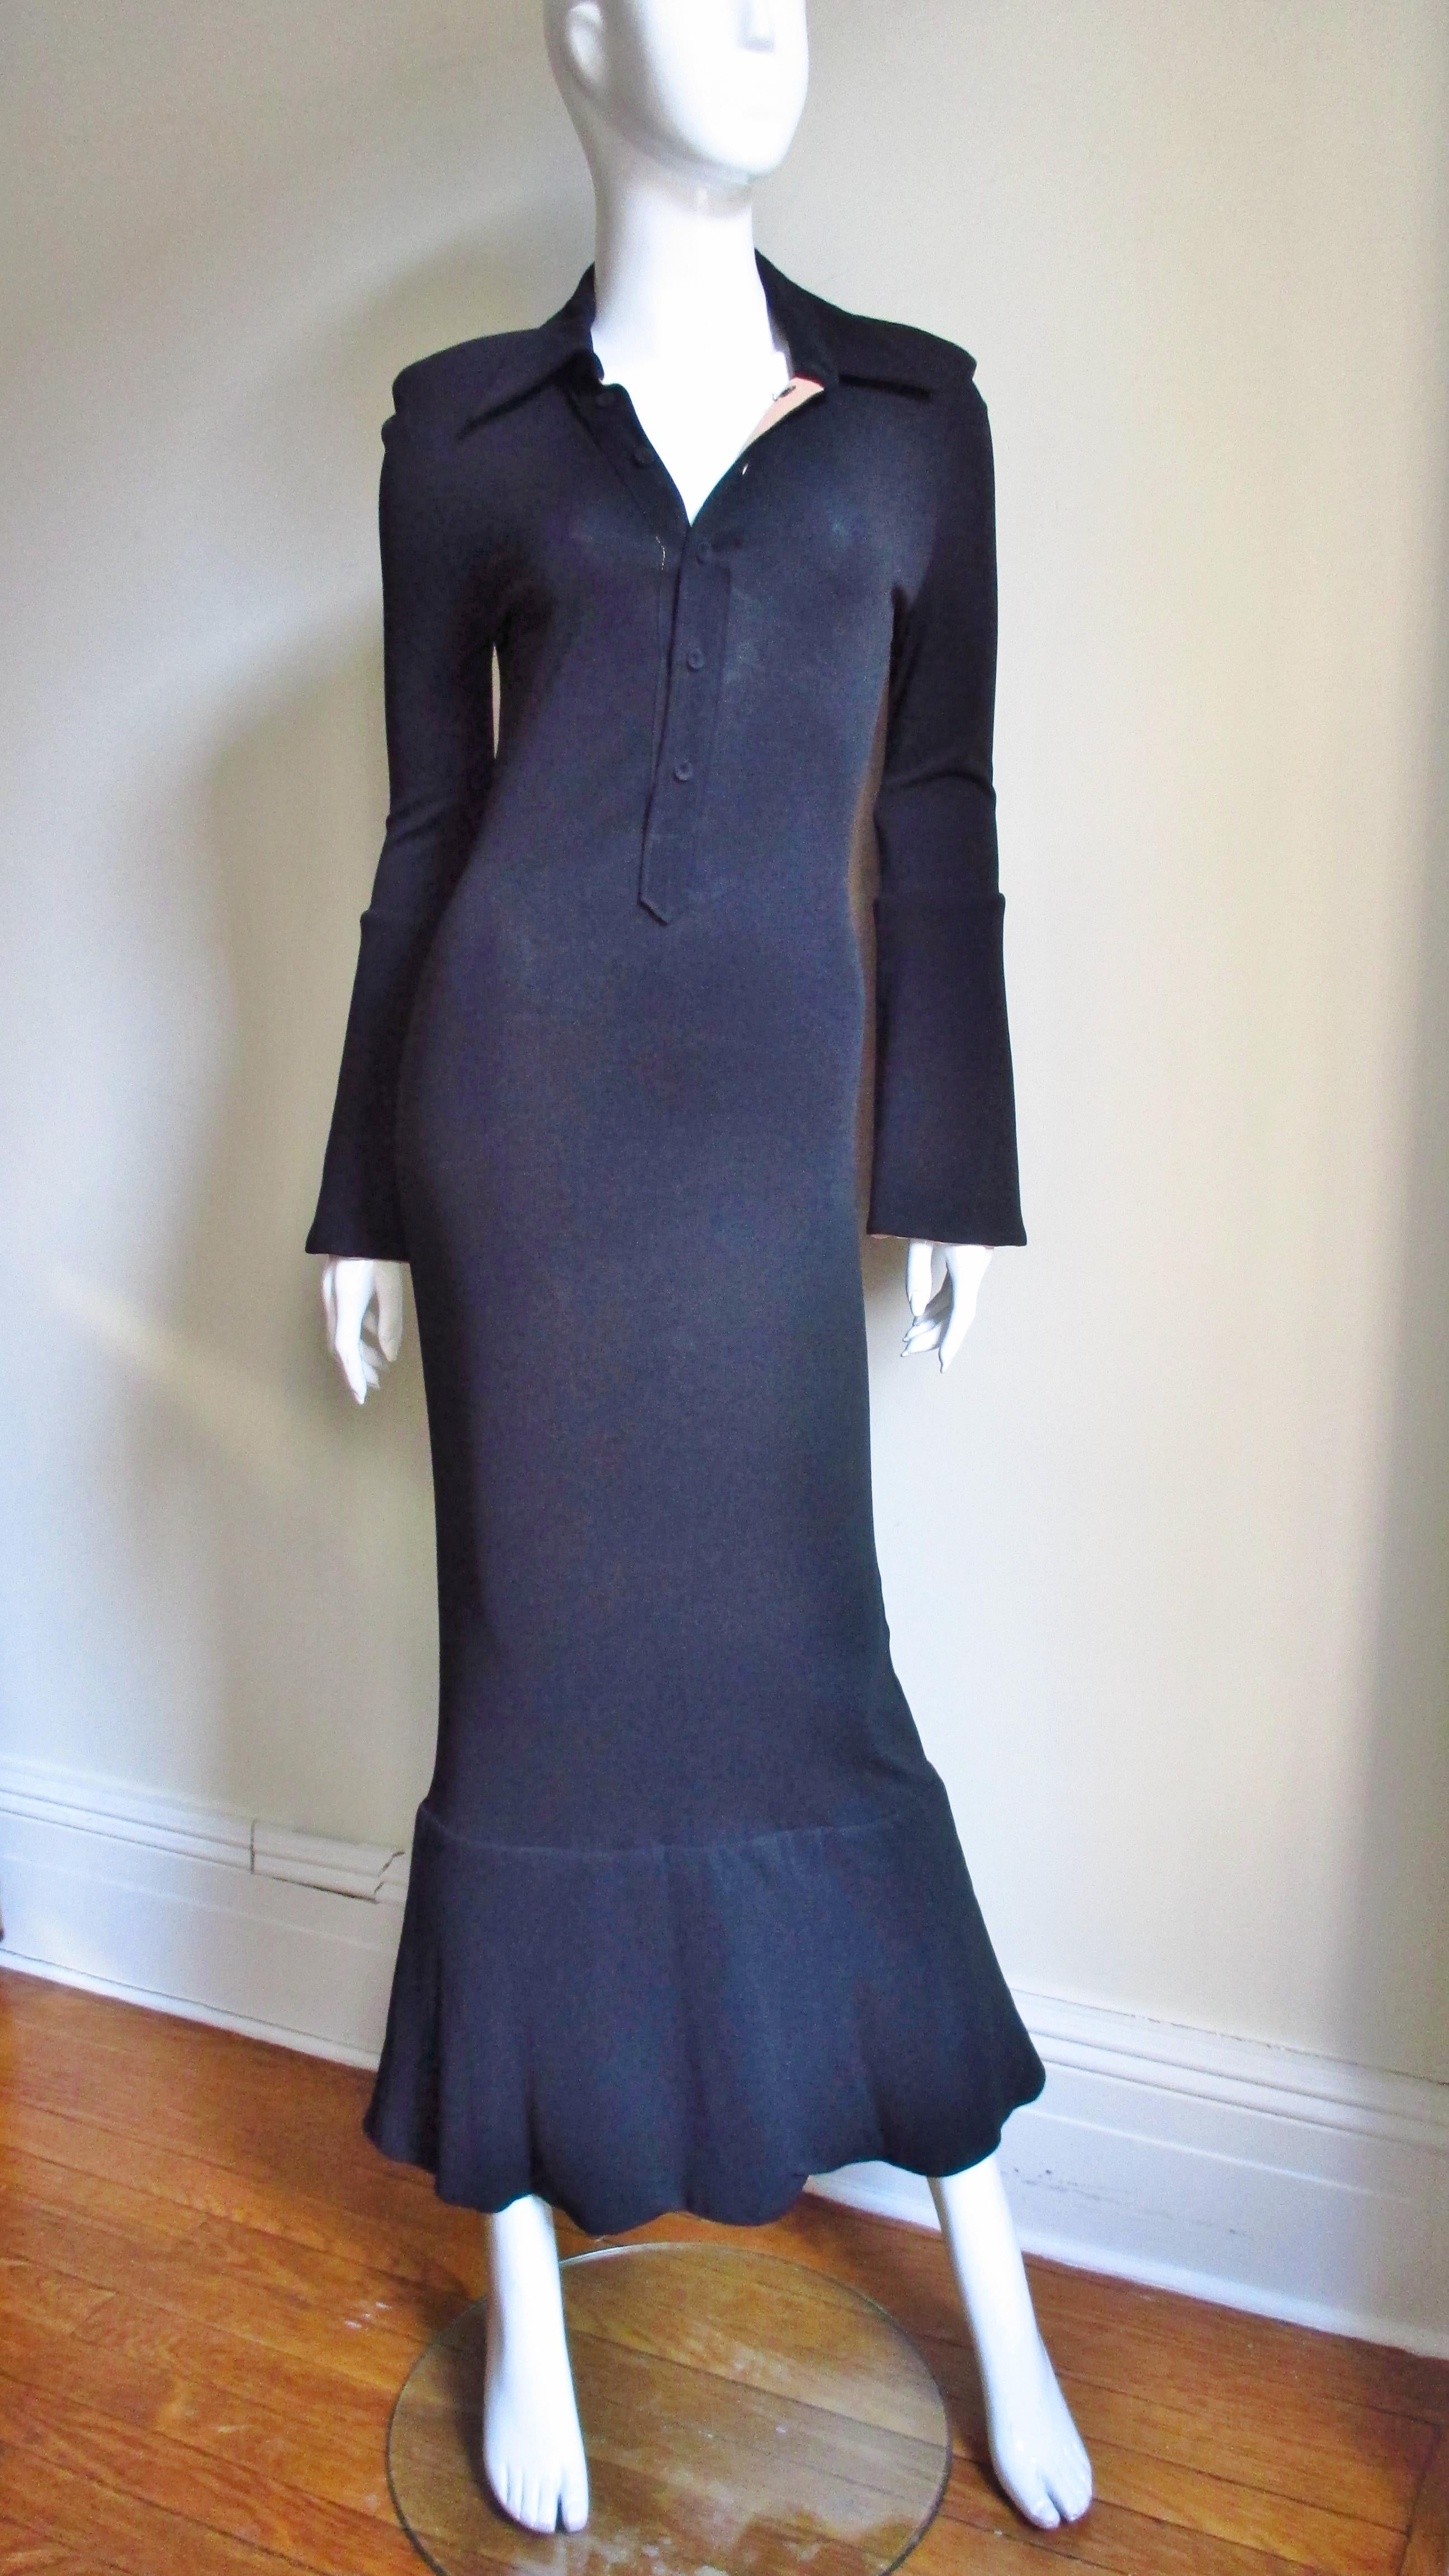 A fabulous black jersey dress from Jean Paul Gaultier's Classique collection.  It has long sleeves with subtly flaring cuffs flaring from just below the elbow which are camel colored underneath.  It has a shirt collar, small shoulder pads and a